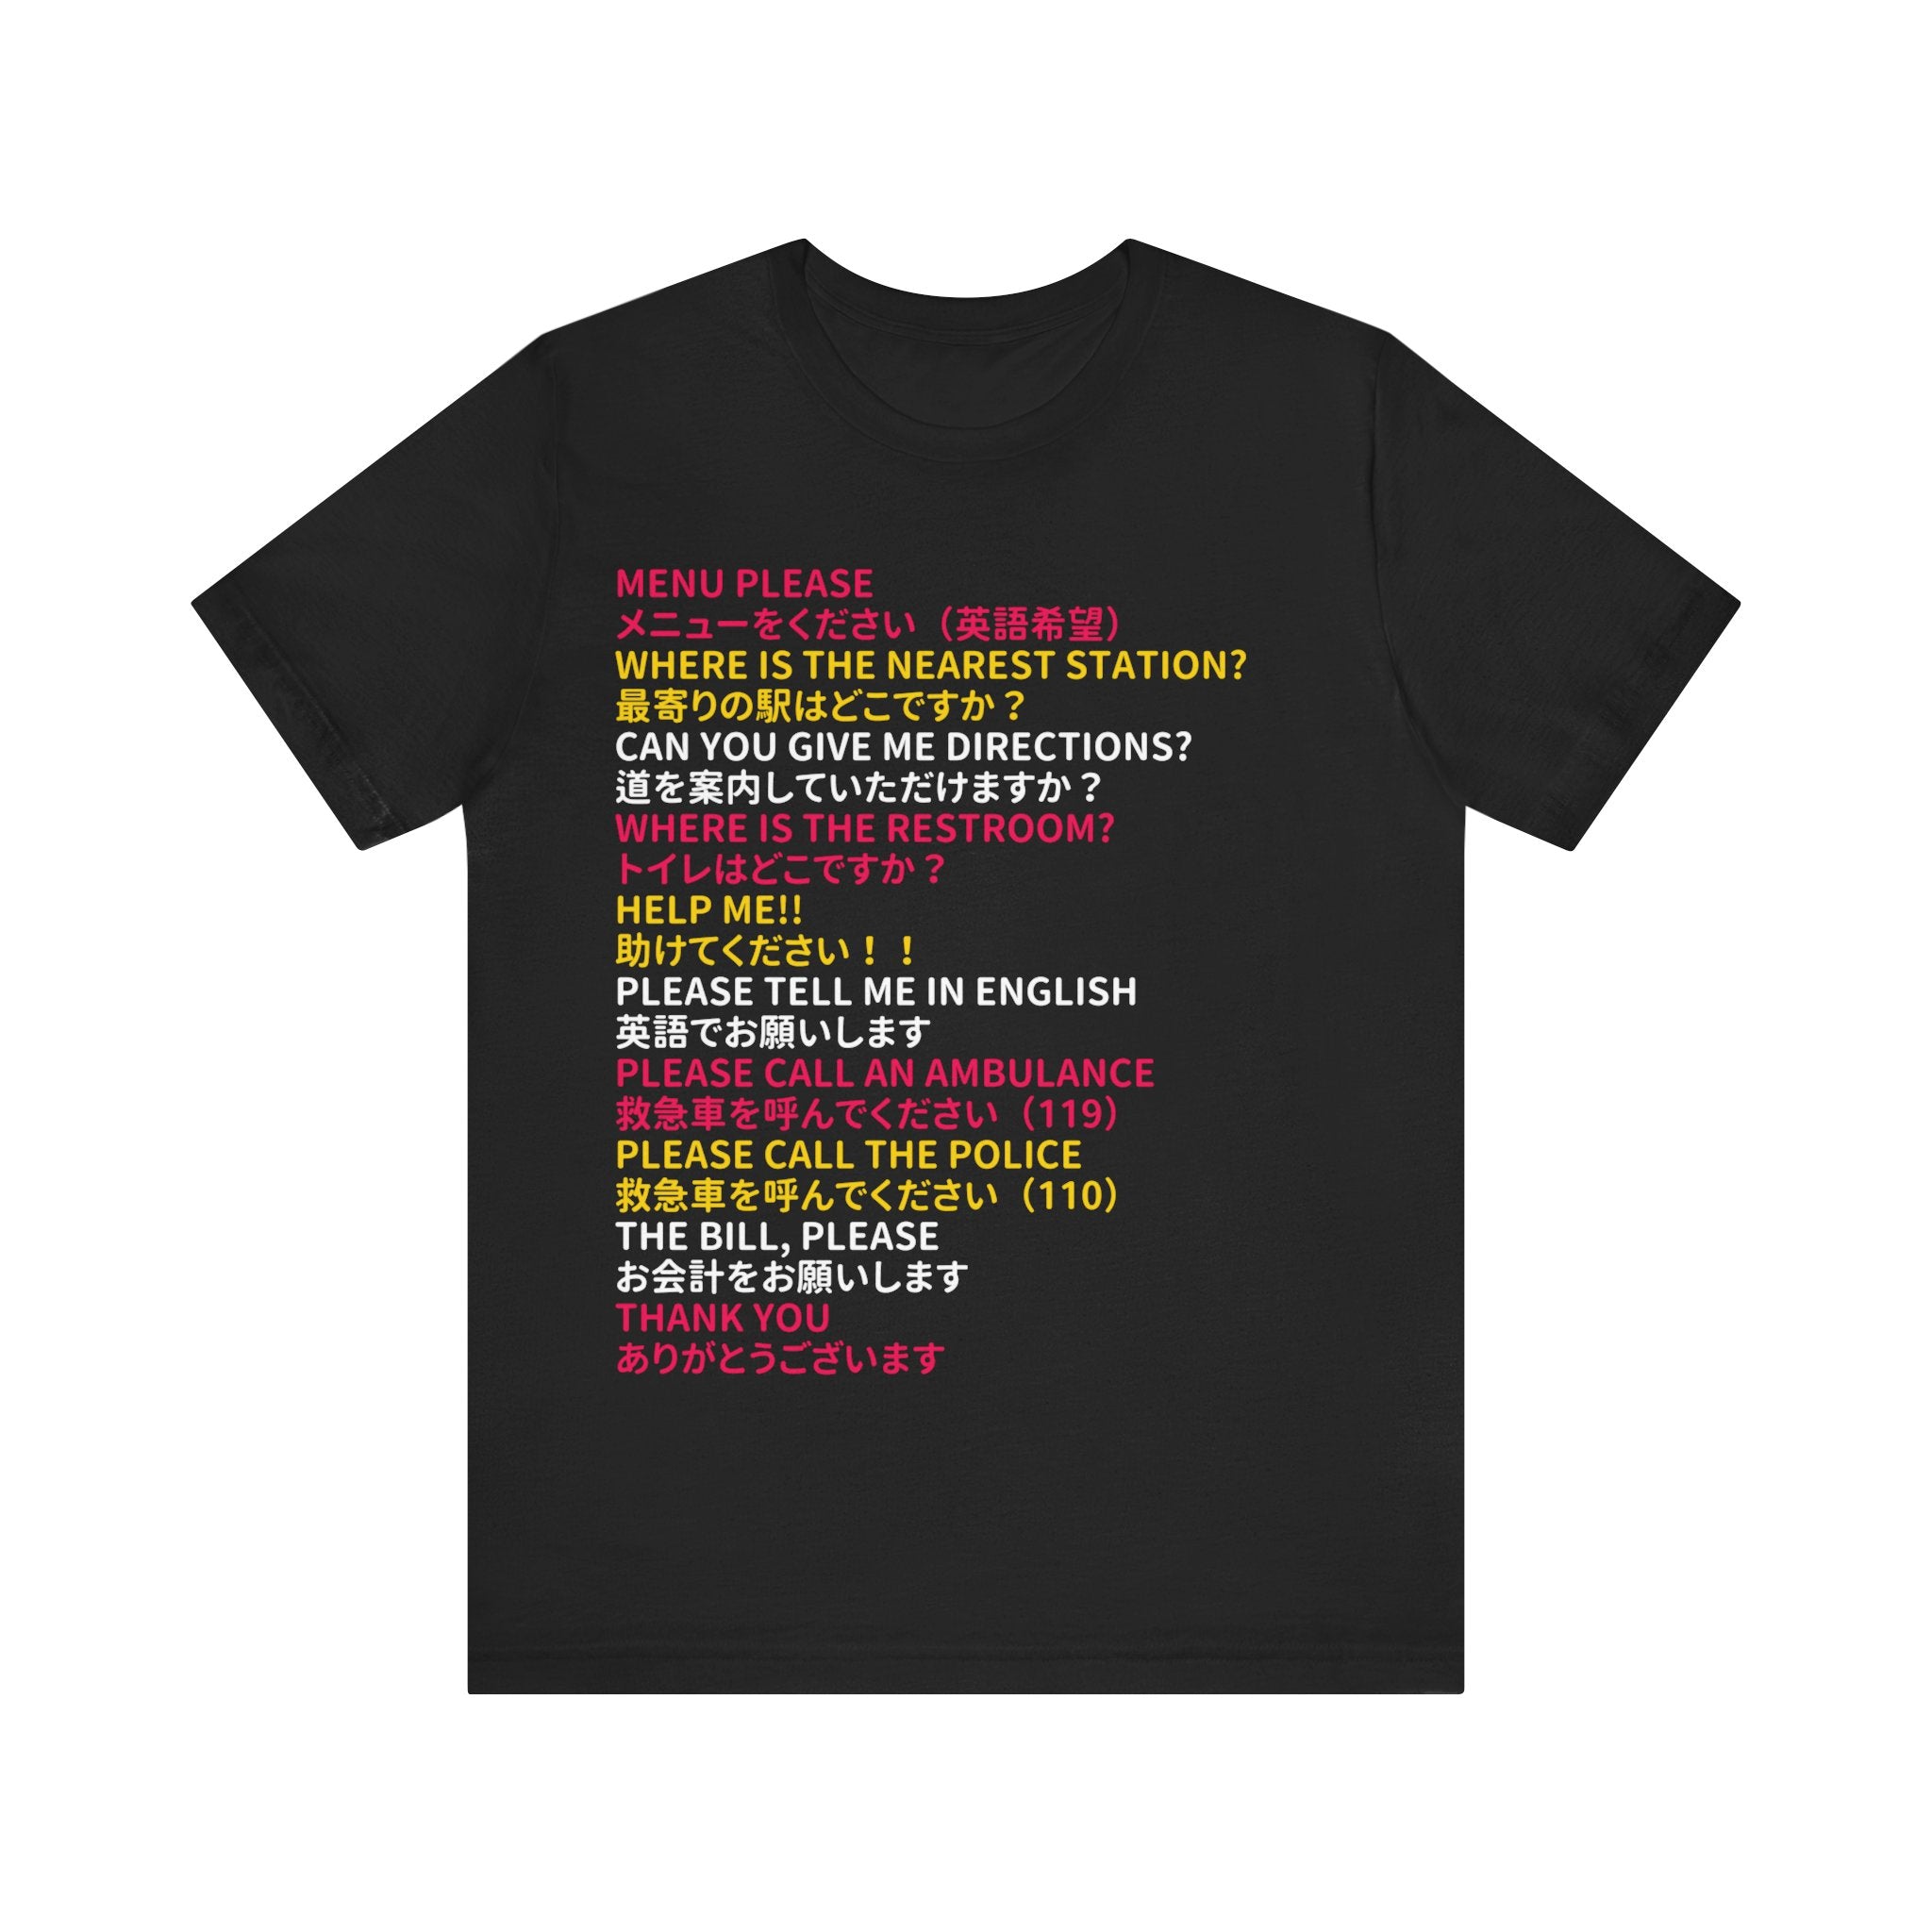 Essential Japanese Phrases T-Shirt for Tourists - Color-Coded English-Japanese Guide - Soft Cotton Unisex Tee